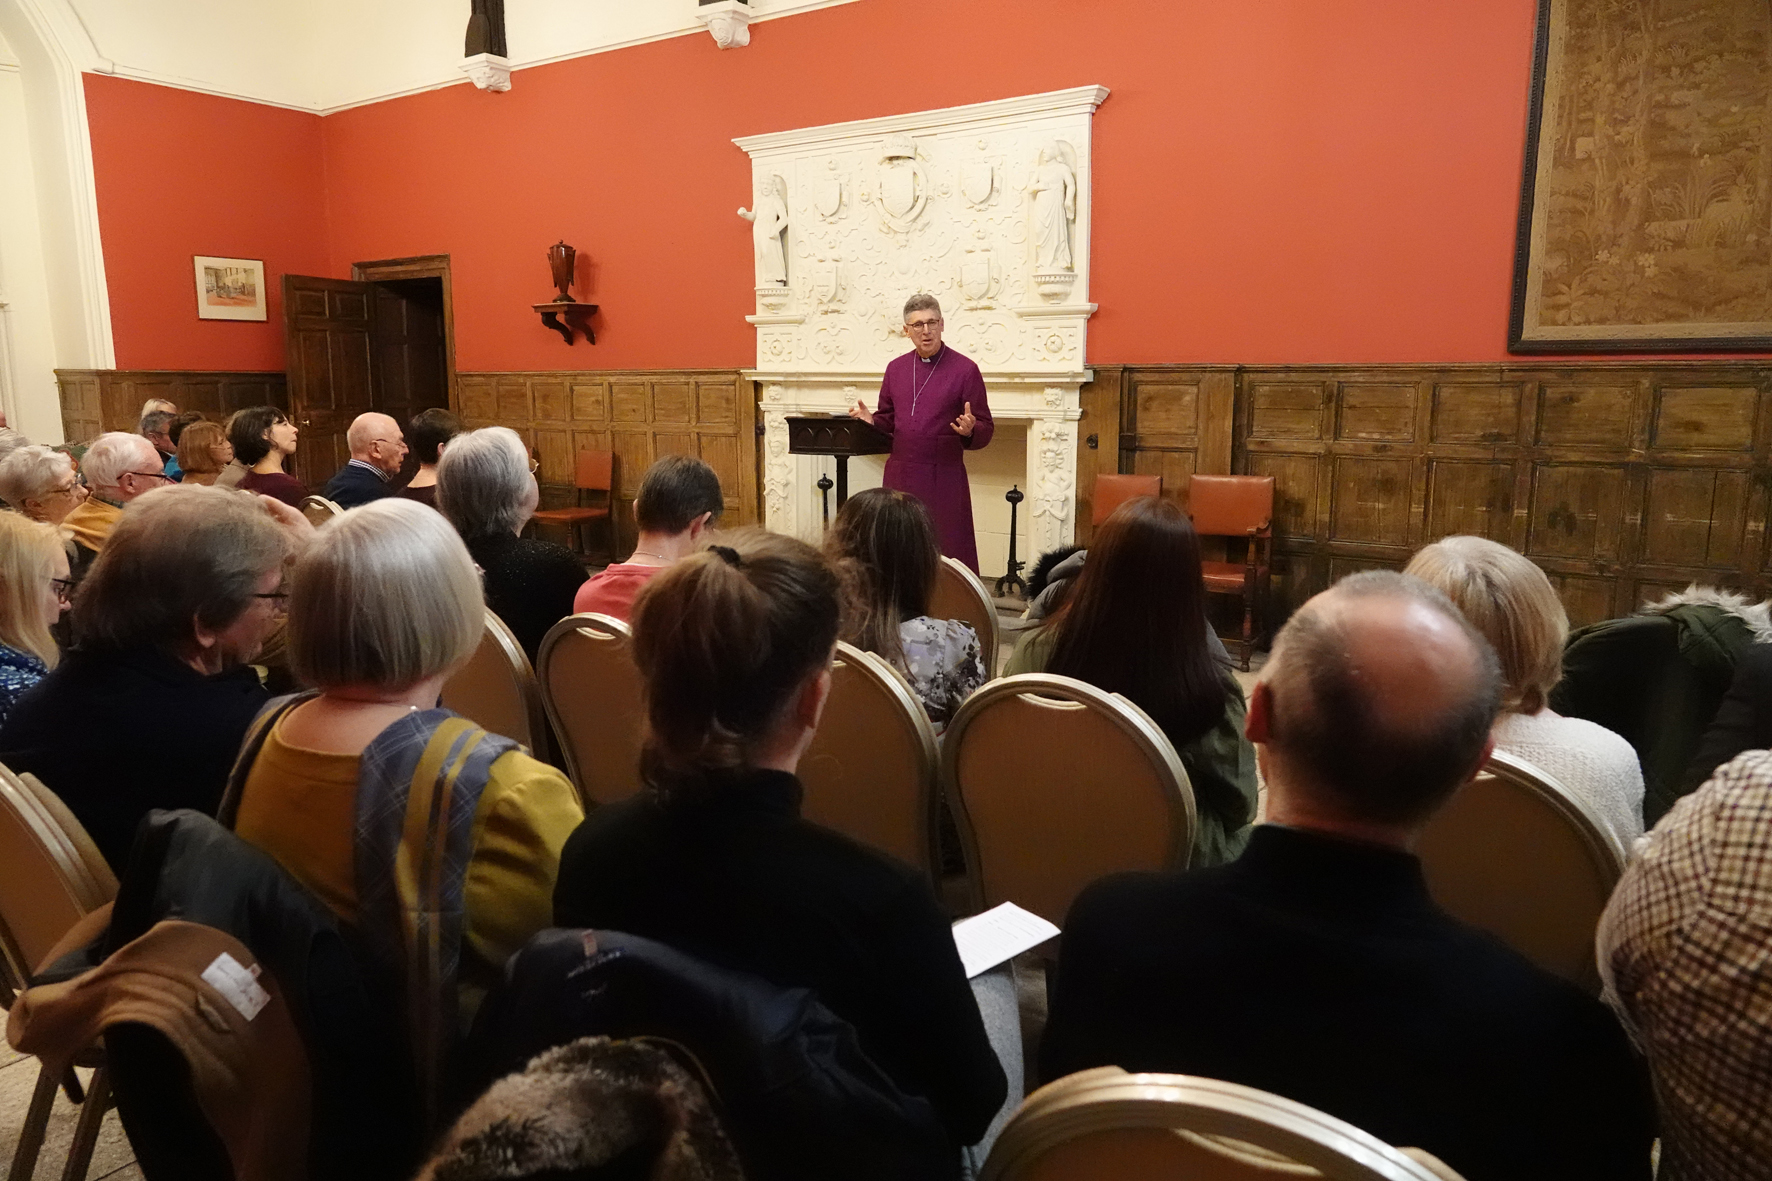 Bishop Martin standing speaking at the front of a group of people